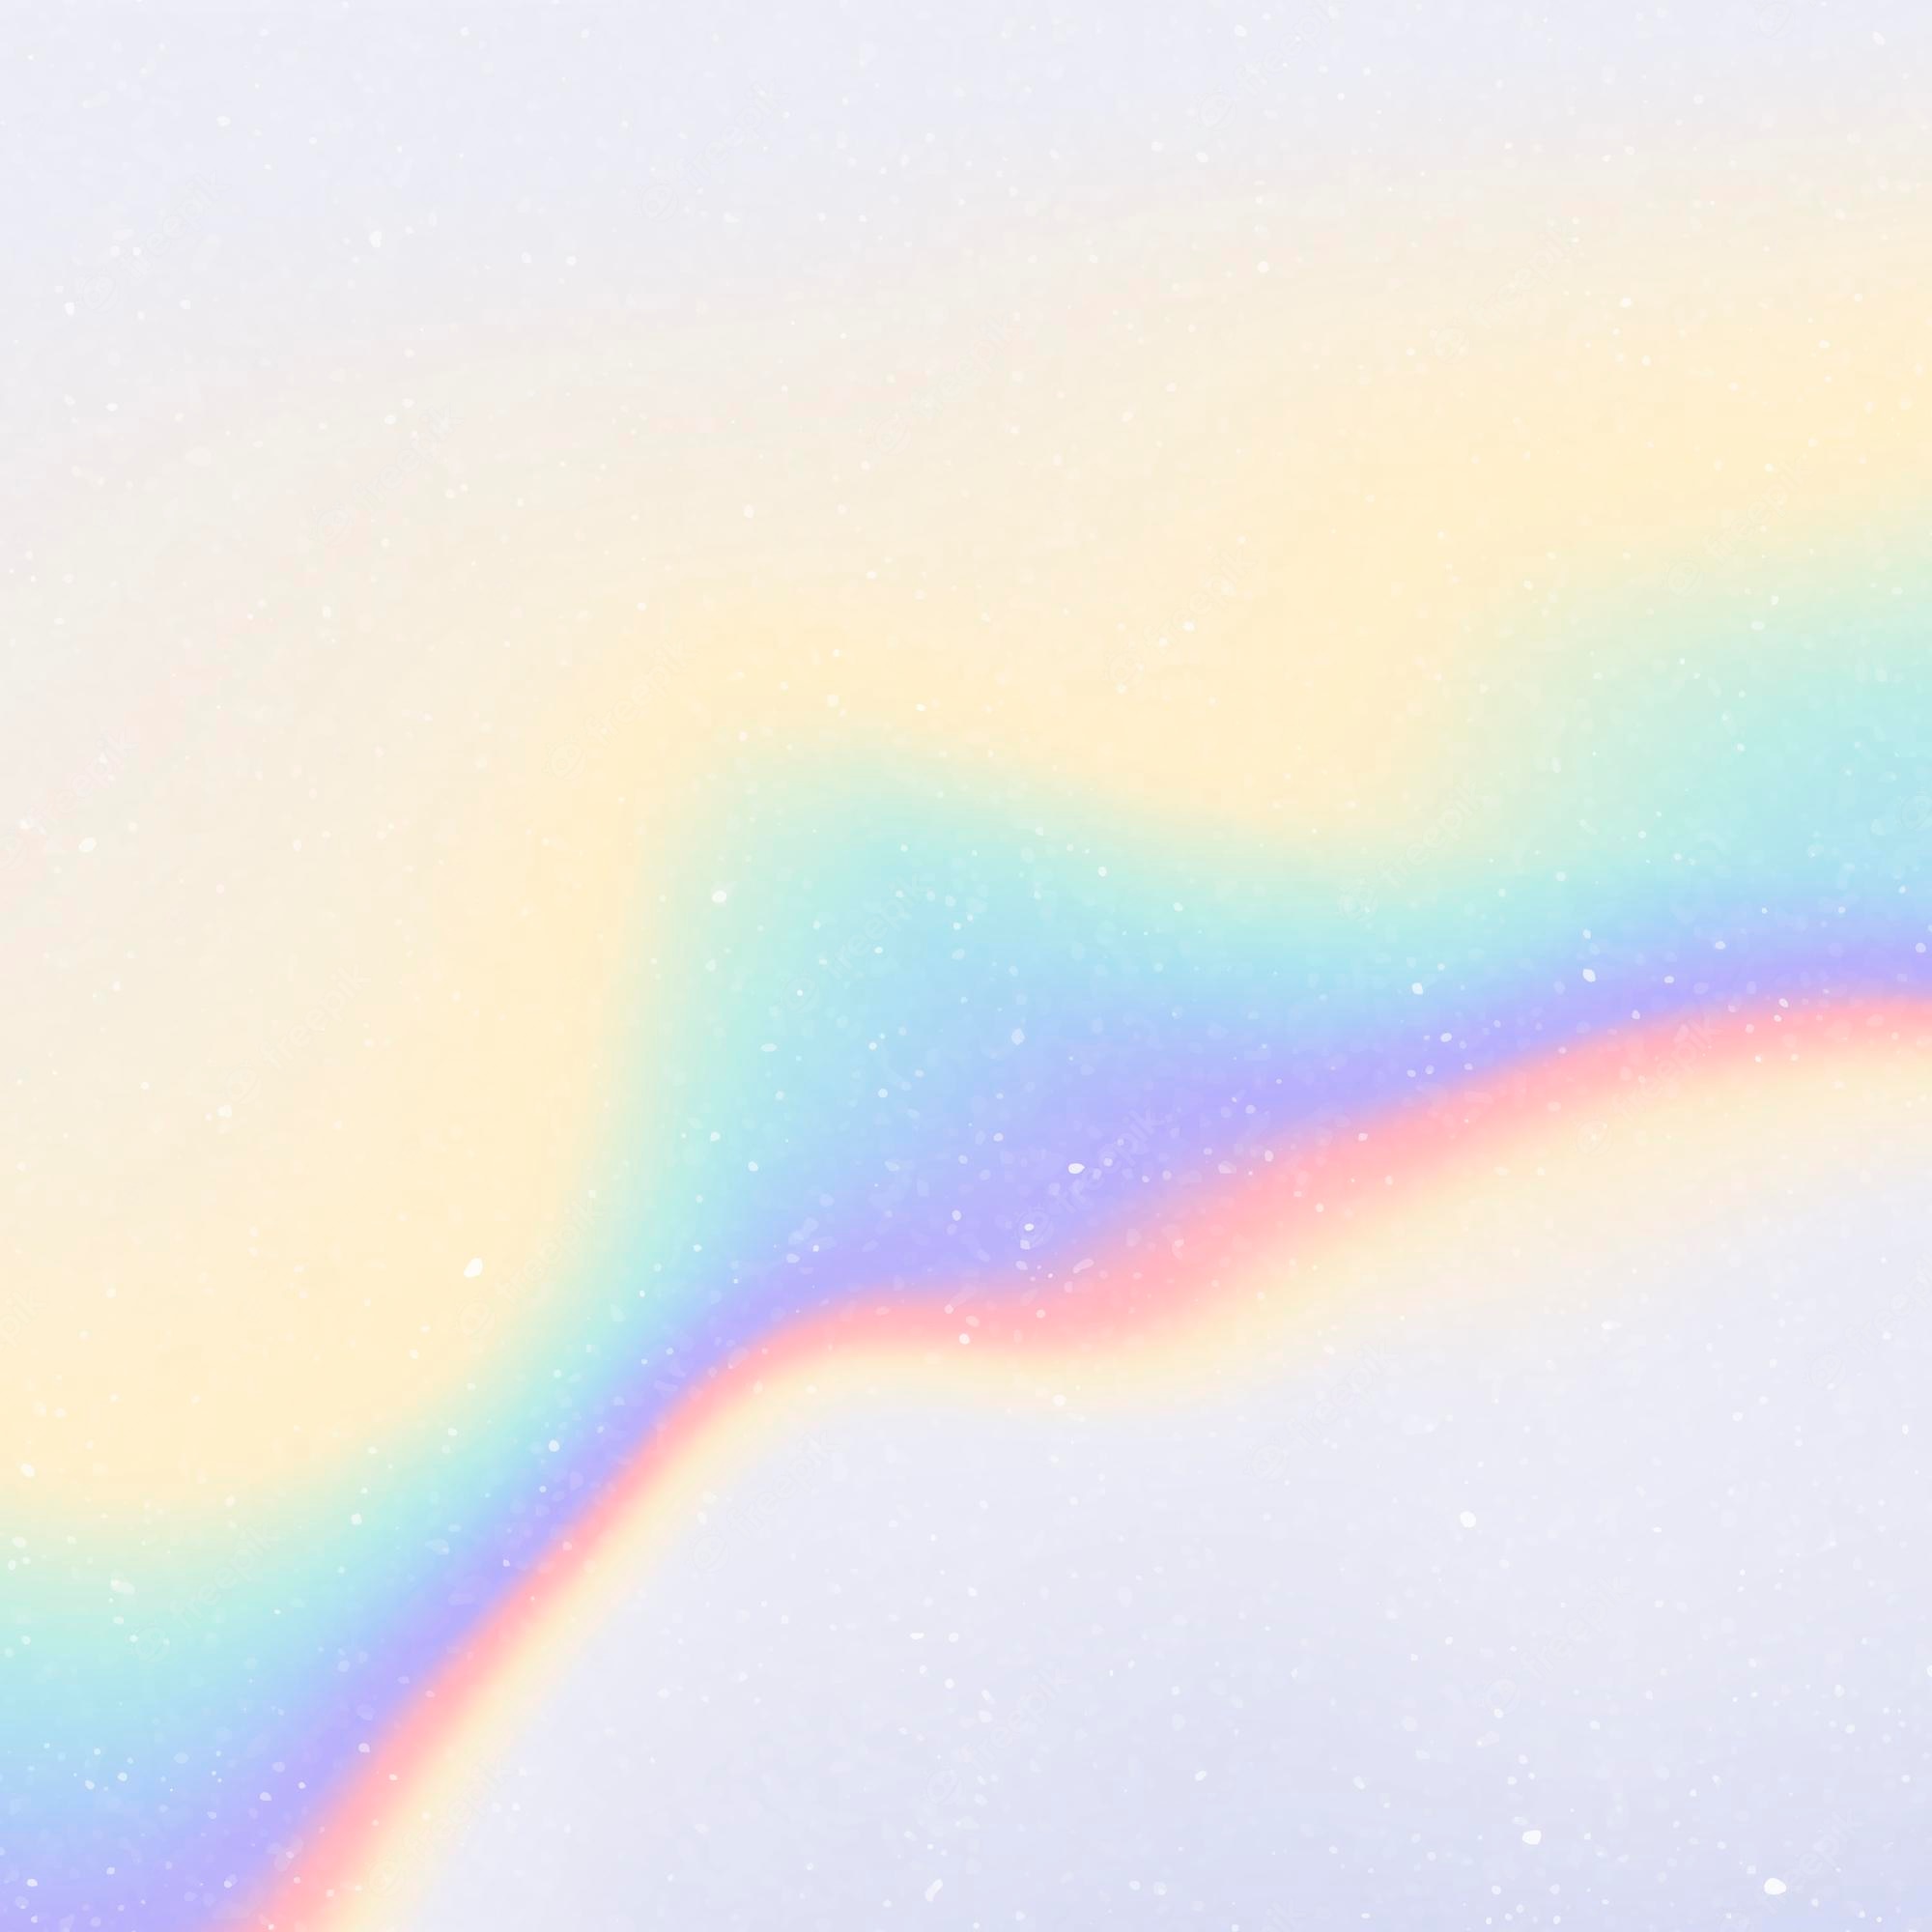 Rainbow aesthetic Vectors & Illustrations for Free Download